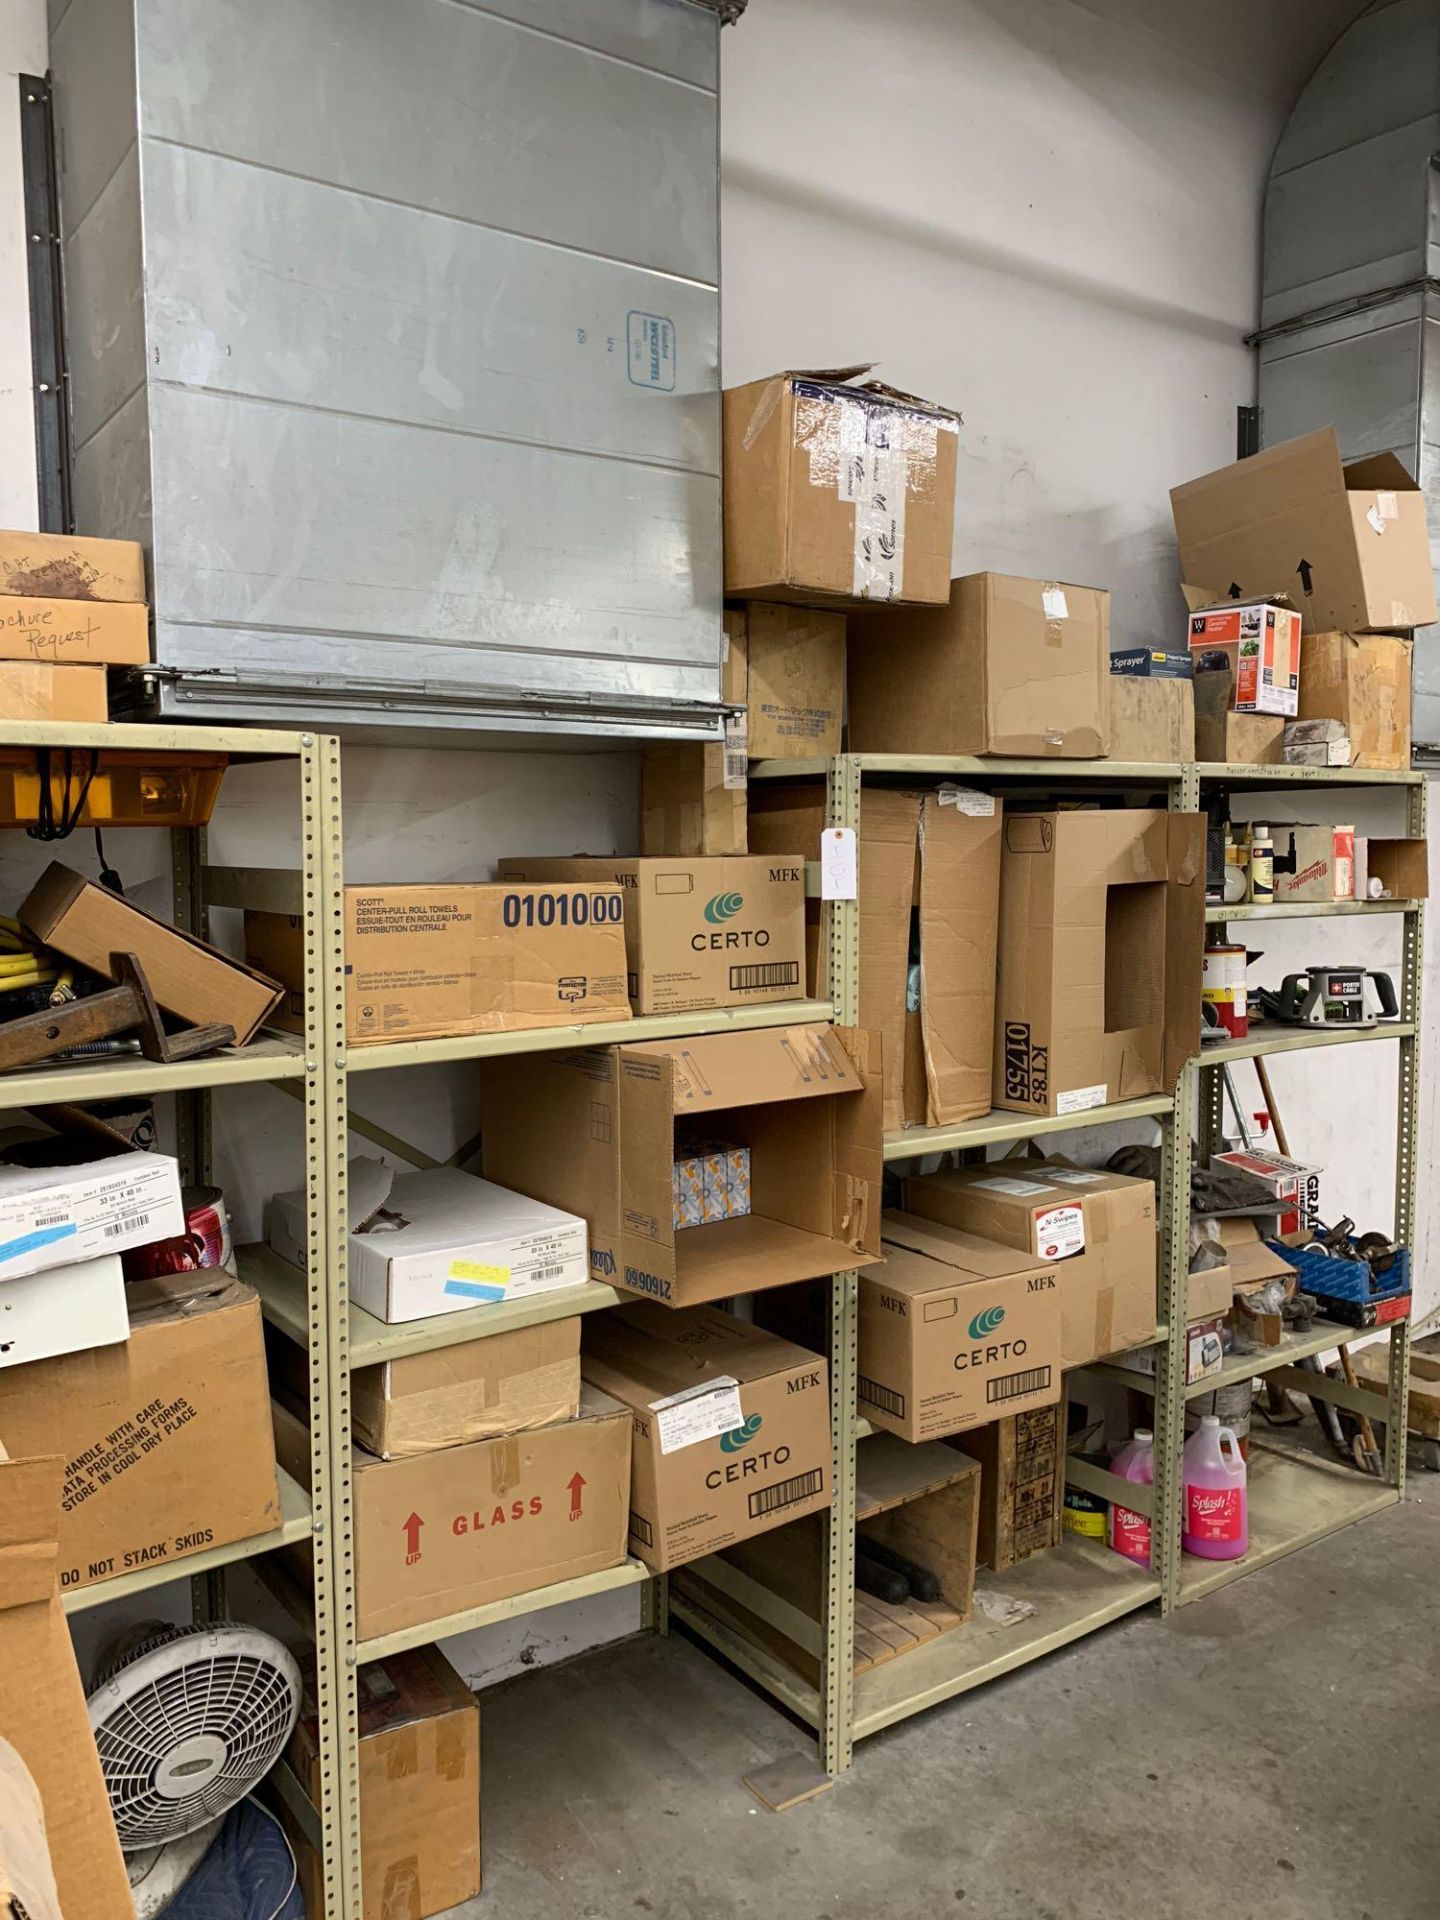 Metal racking and contents including office supplies and fluorescent light bulbs